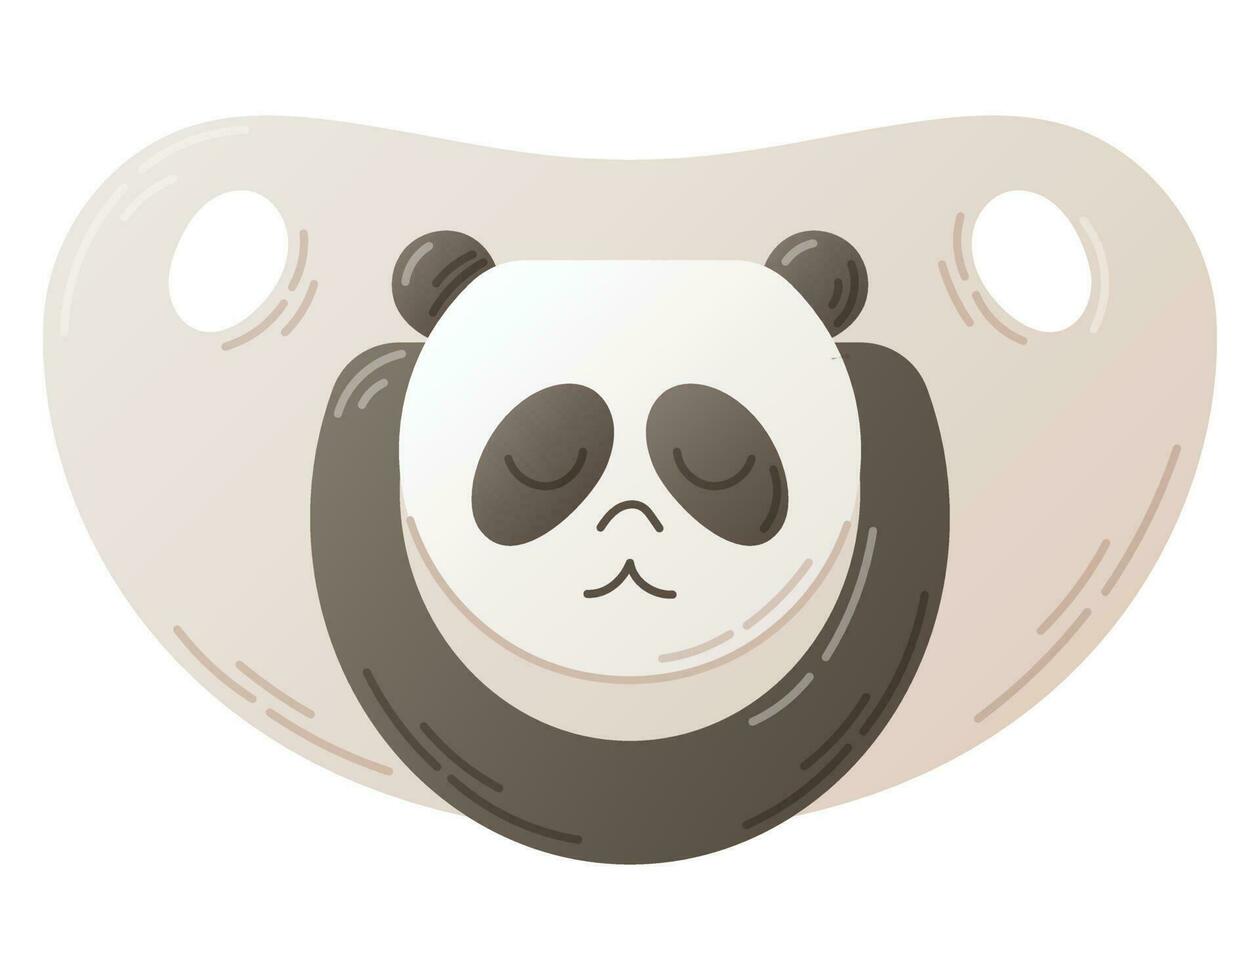 Baby cute flat pacifier with sleeping panda illustration. Vector isolated cartoon baby design element.